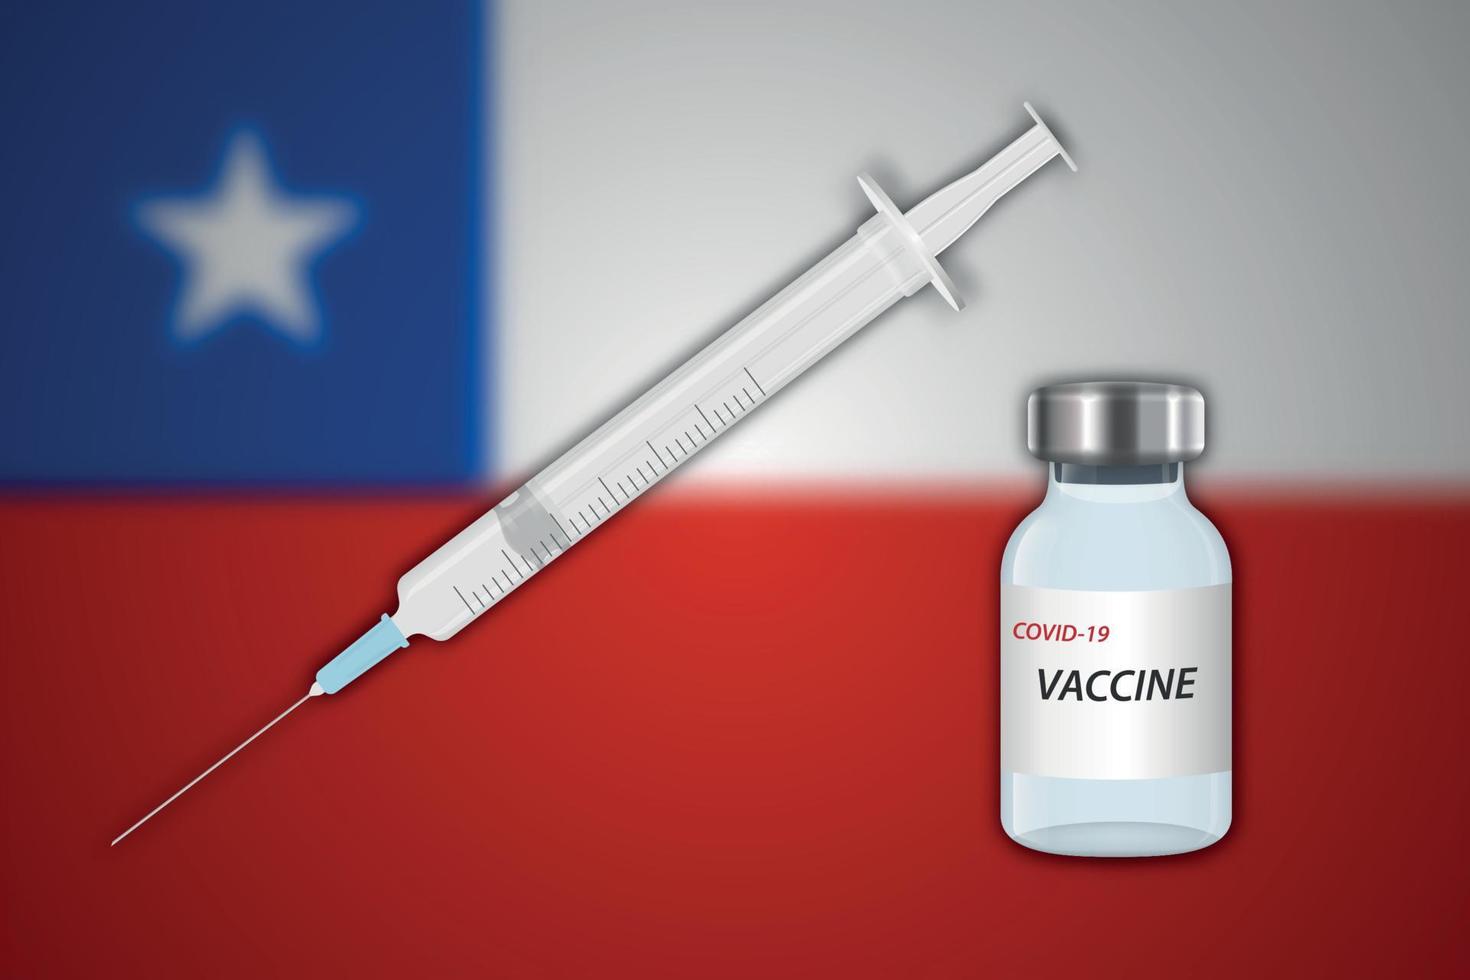 Syringe and vaccine vial on blur background with Chile flag vector